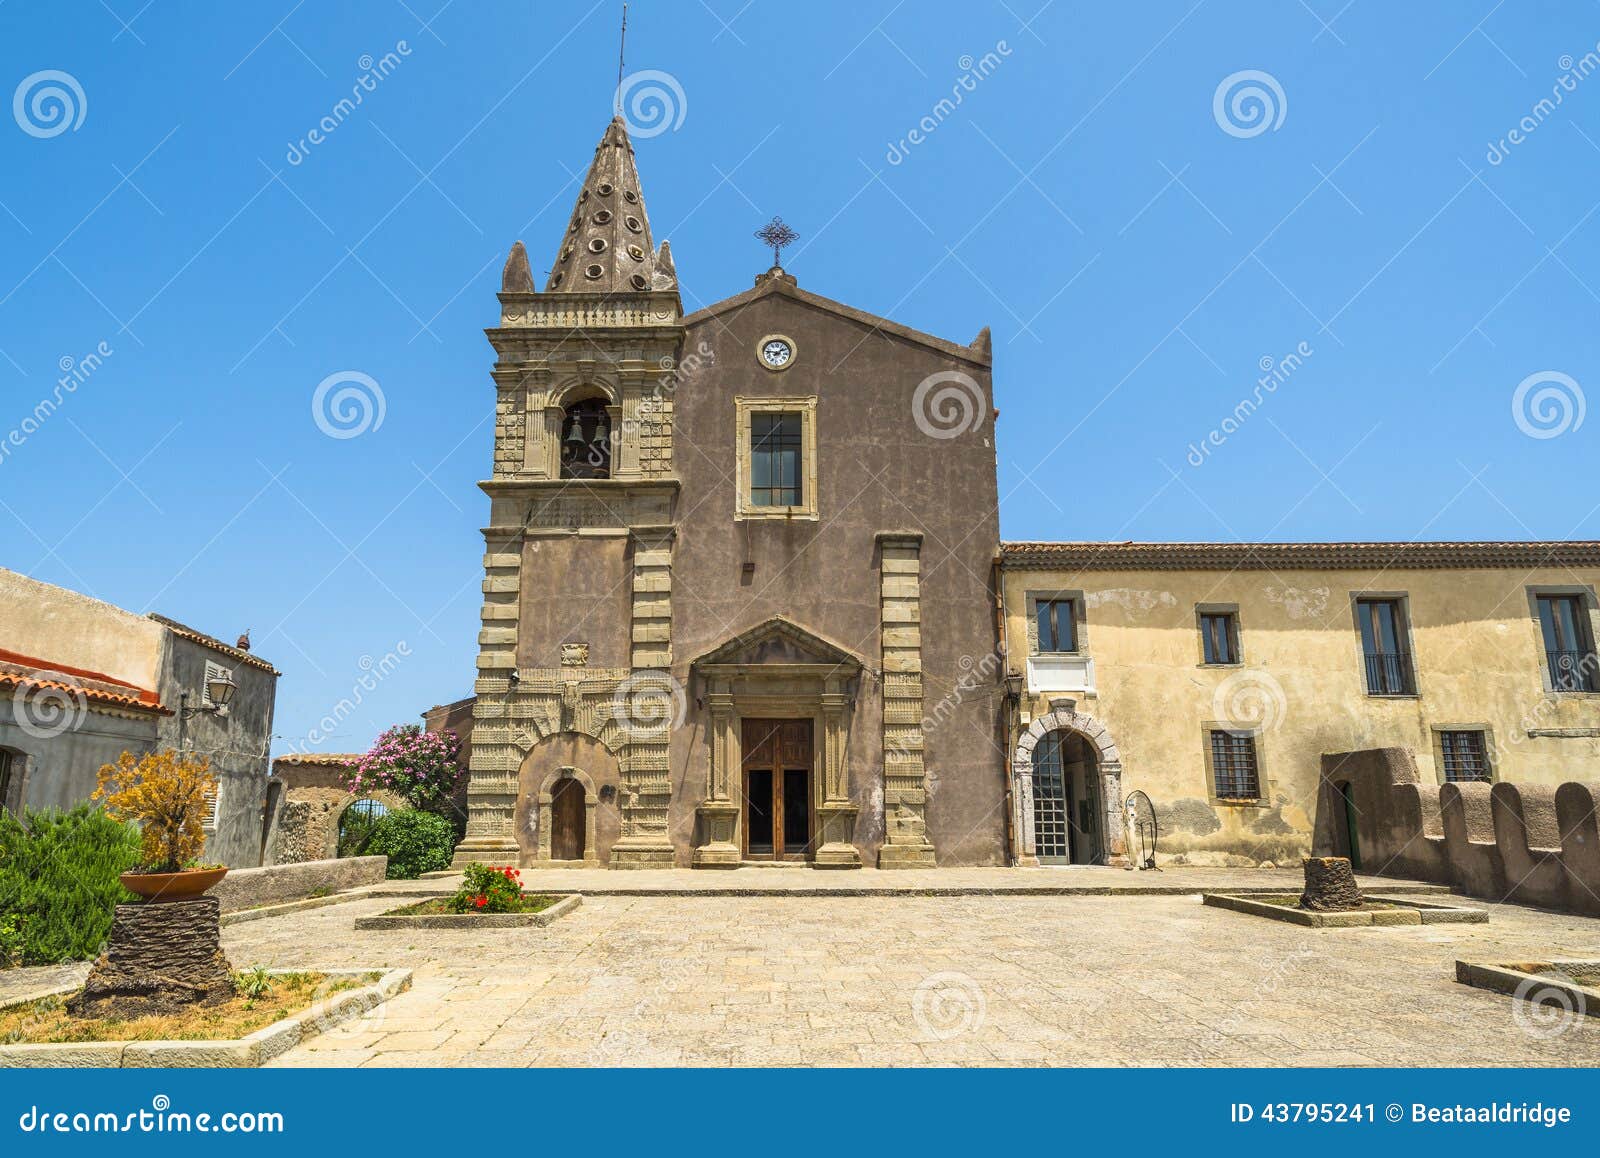 convent of st. agostiniano in forza d'agro, sicily